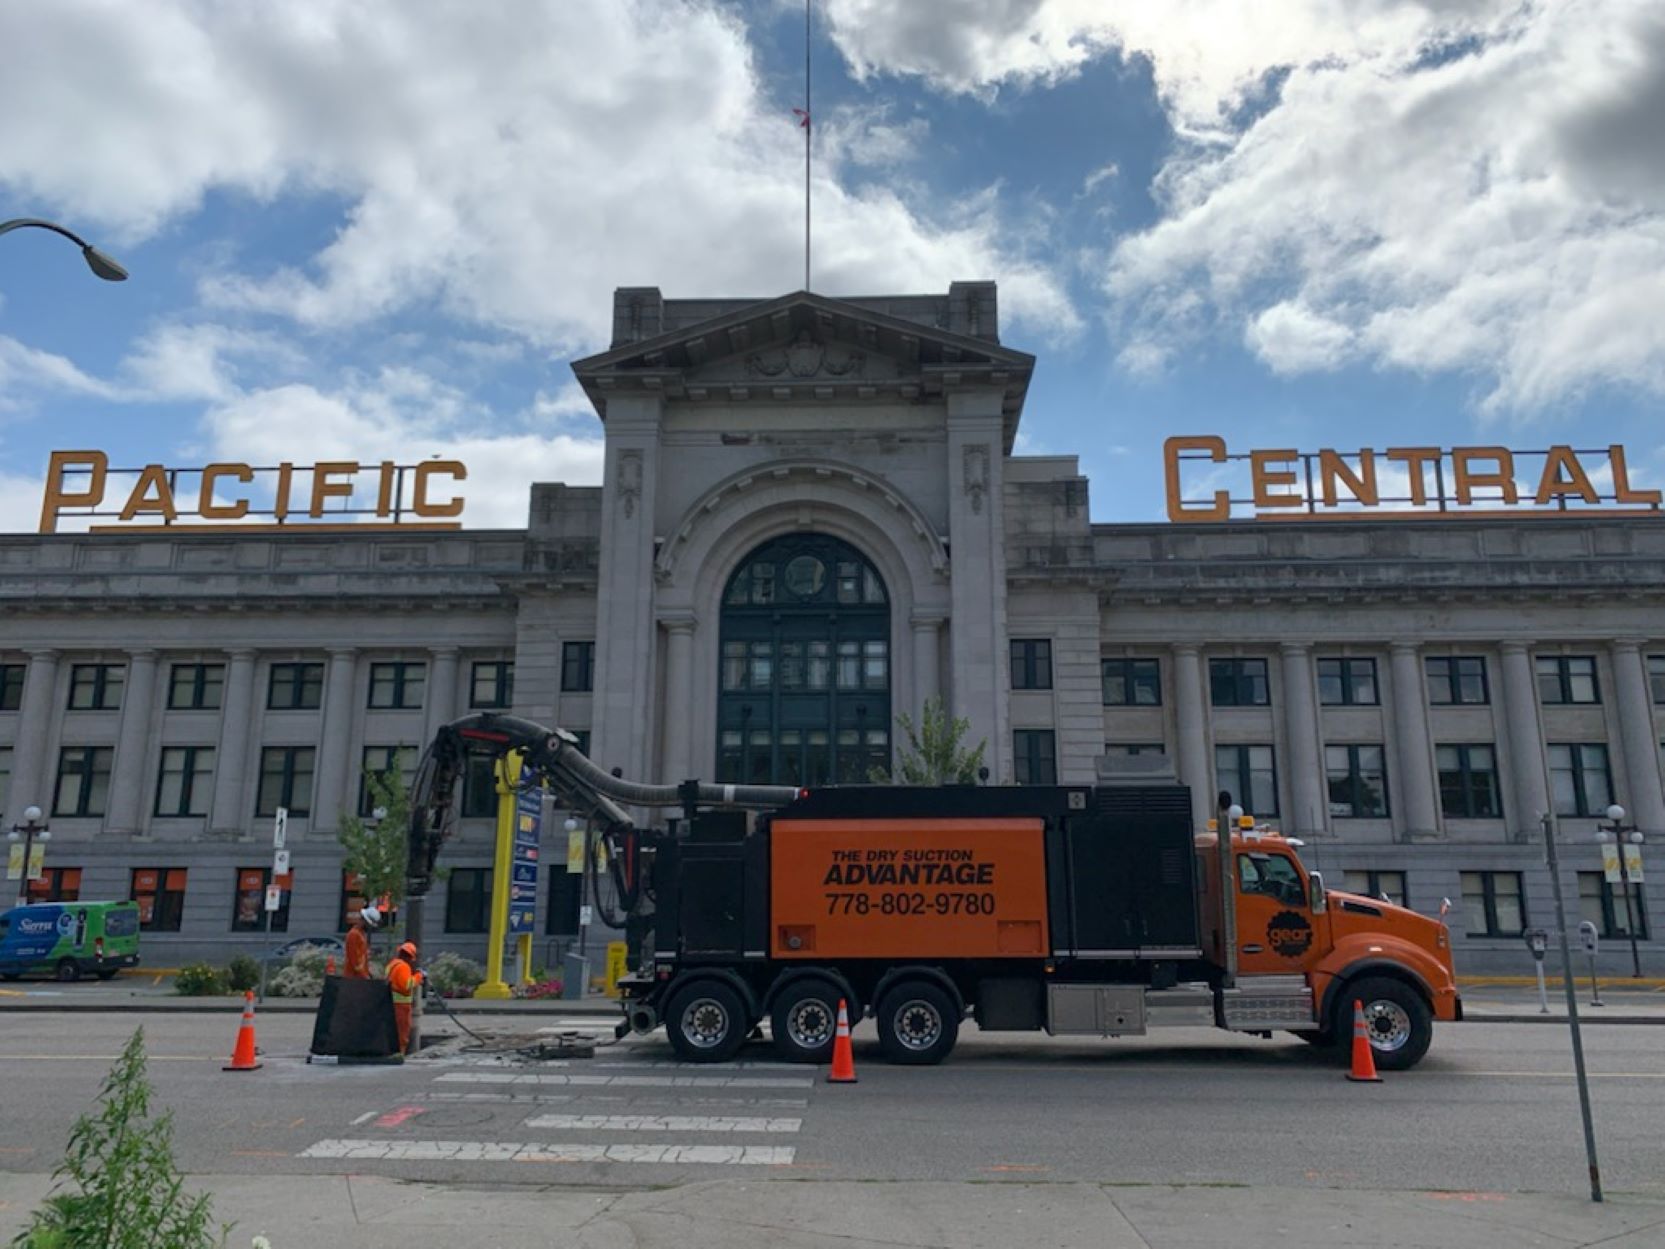 Pacific Central – Vac Truck RE